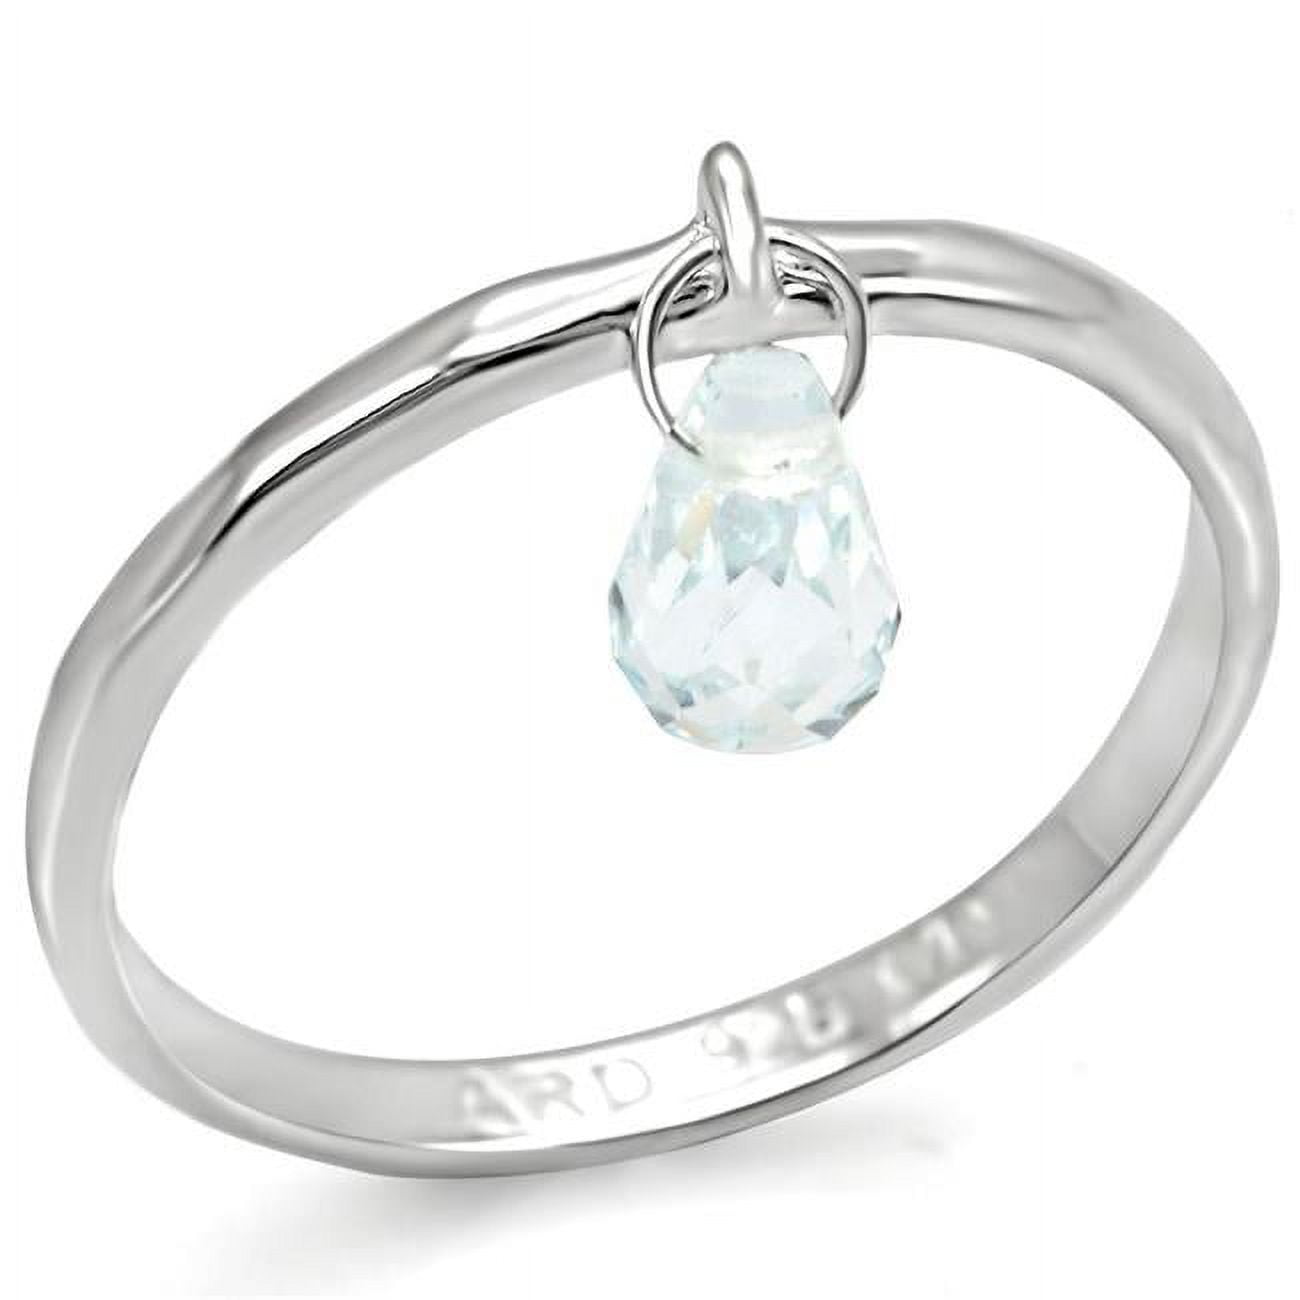 Picture of Alamode LOS318-10 Women Silver 925 Sterling Silver Ring with Genuine Stone in Aquamarine - Size 10